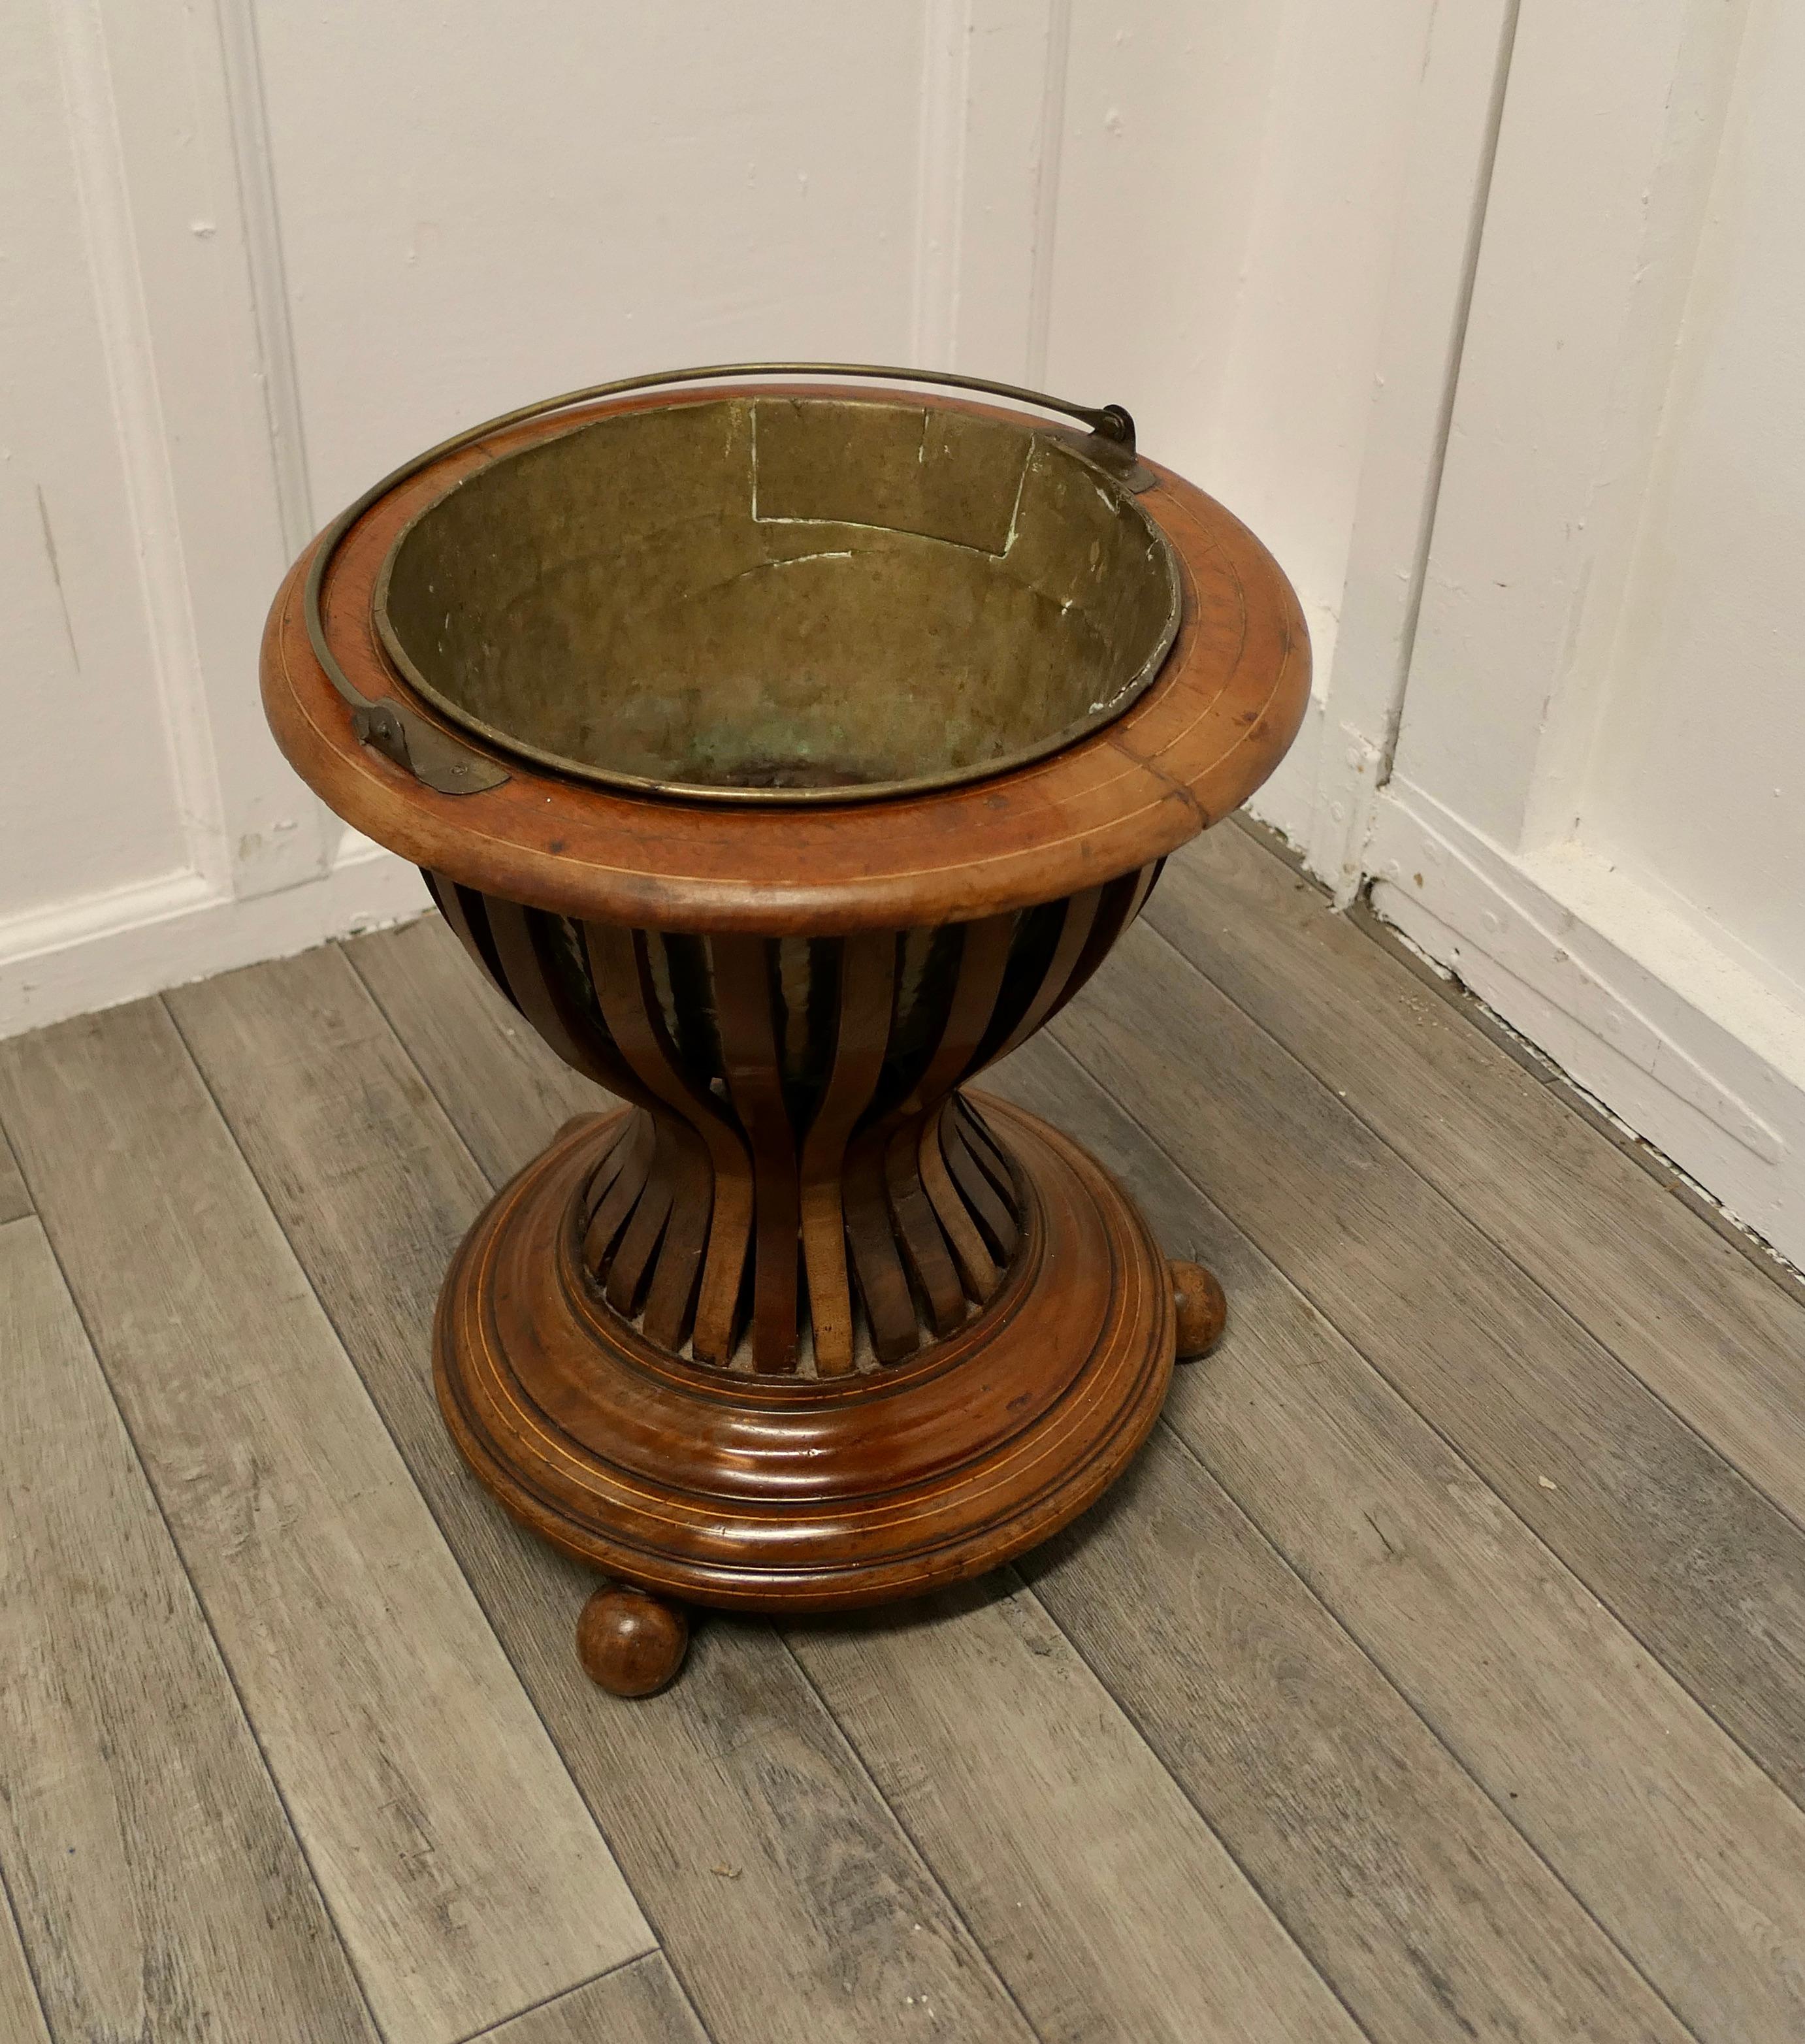 19th century Hourglass peat bucket planter

A very attractive design, the Hourglass shape is made in wood strapping, and the original brass liner is present
The planter sits on turned wooden feet and it has its own handle 
The planter is in good